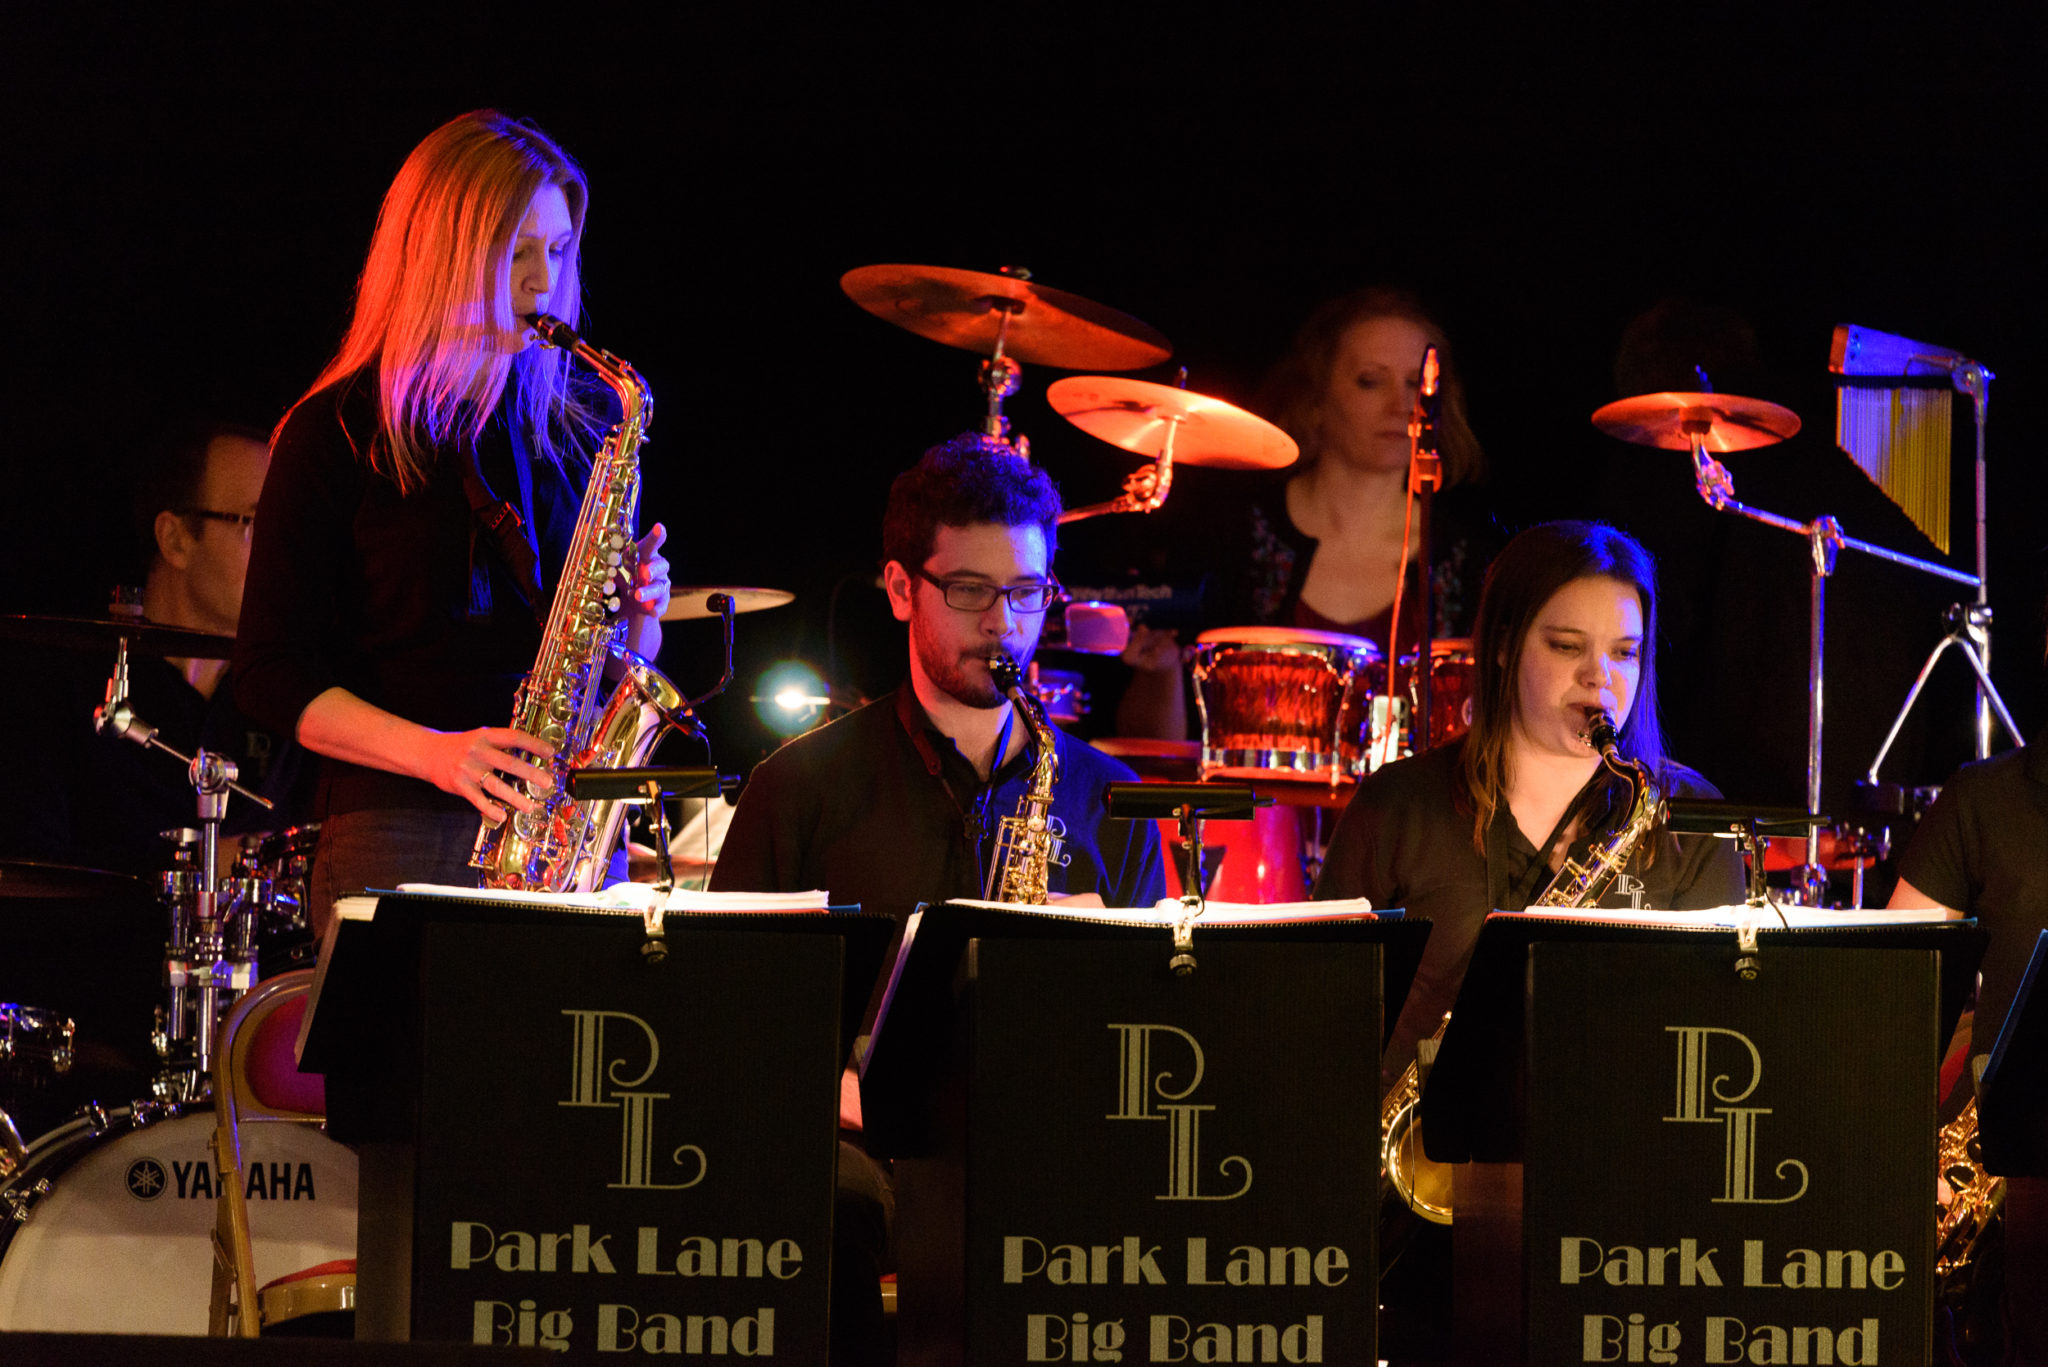 Park Lane Big Band - Weddings, Corporate Events, Parties, Functions